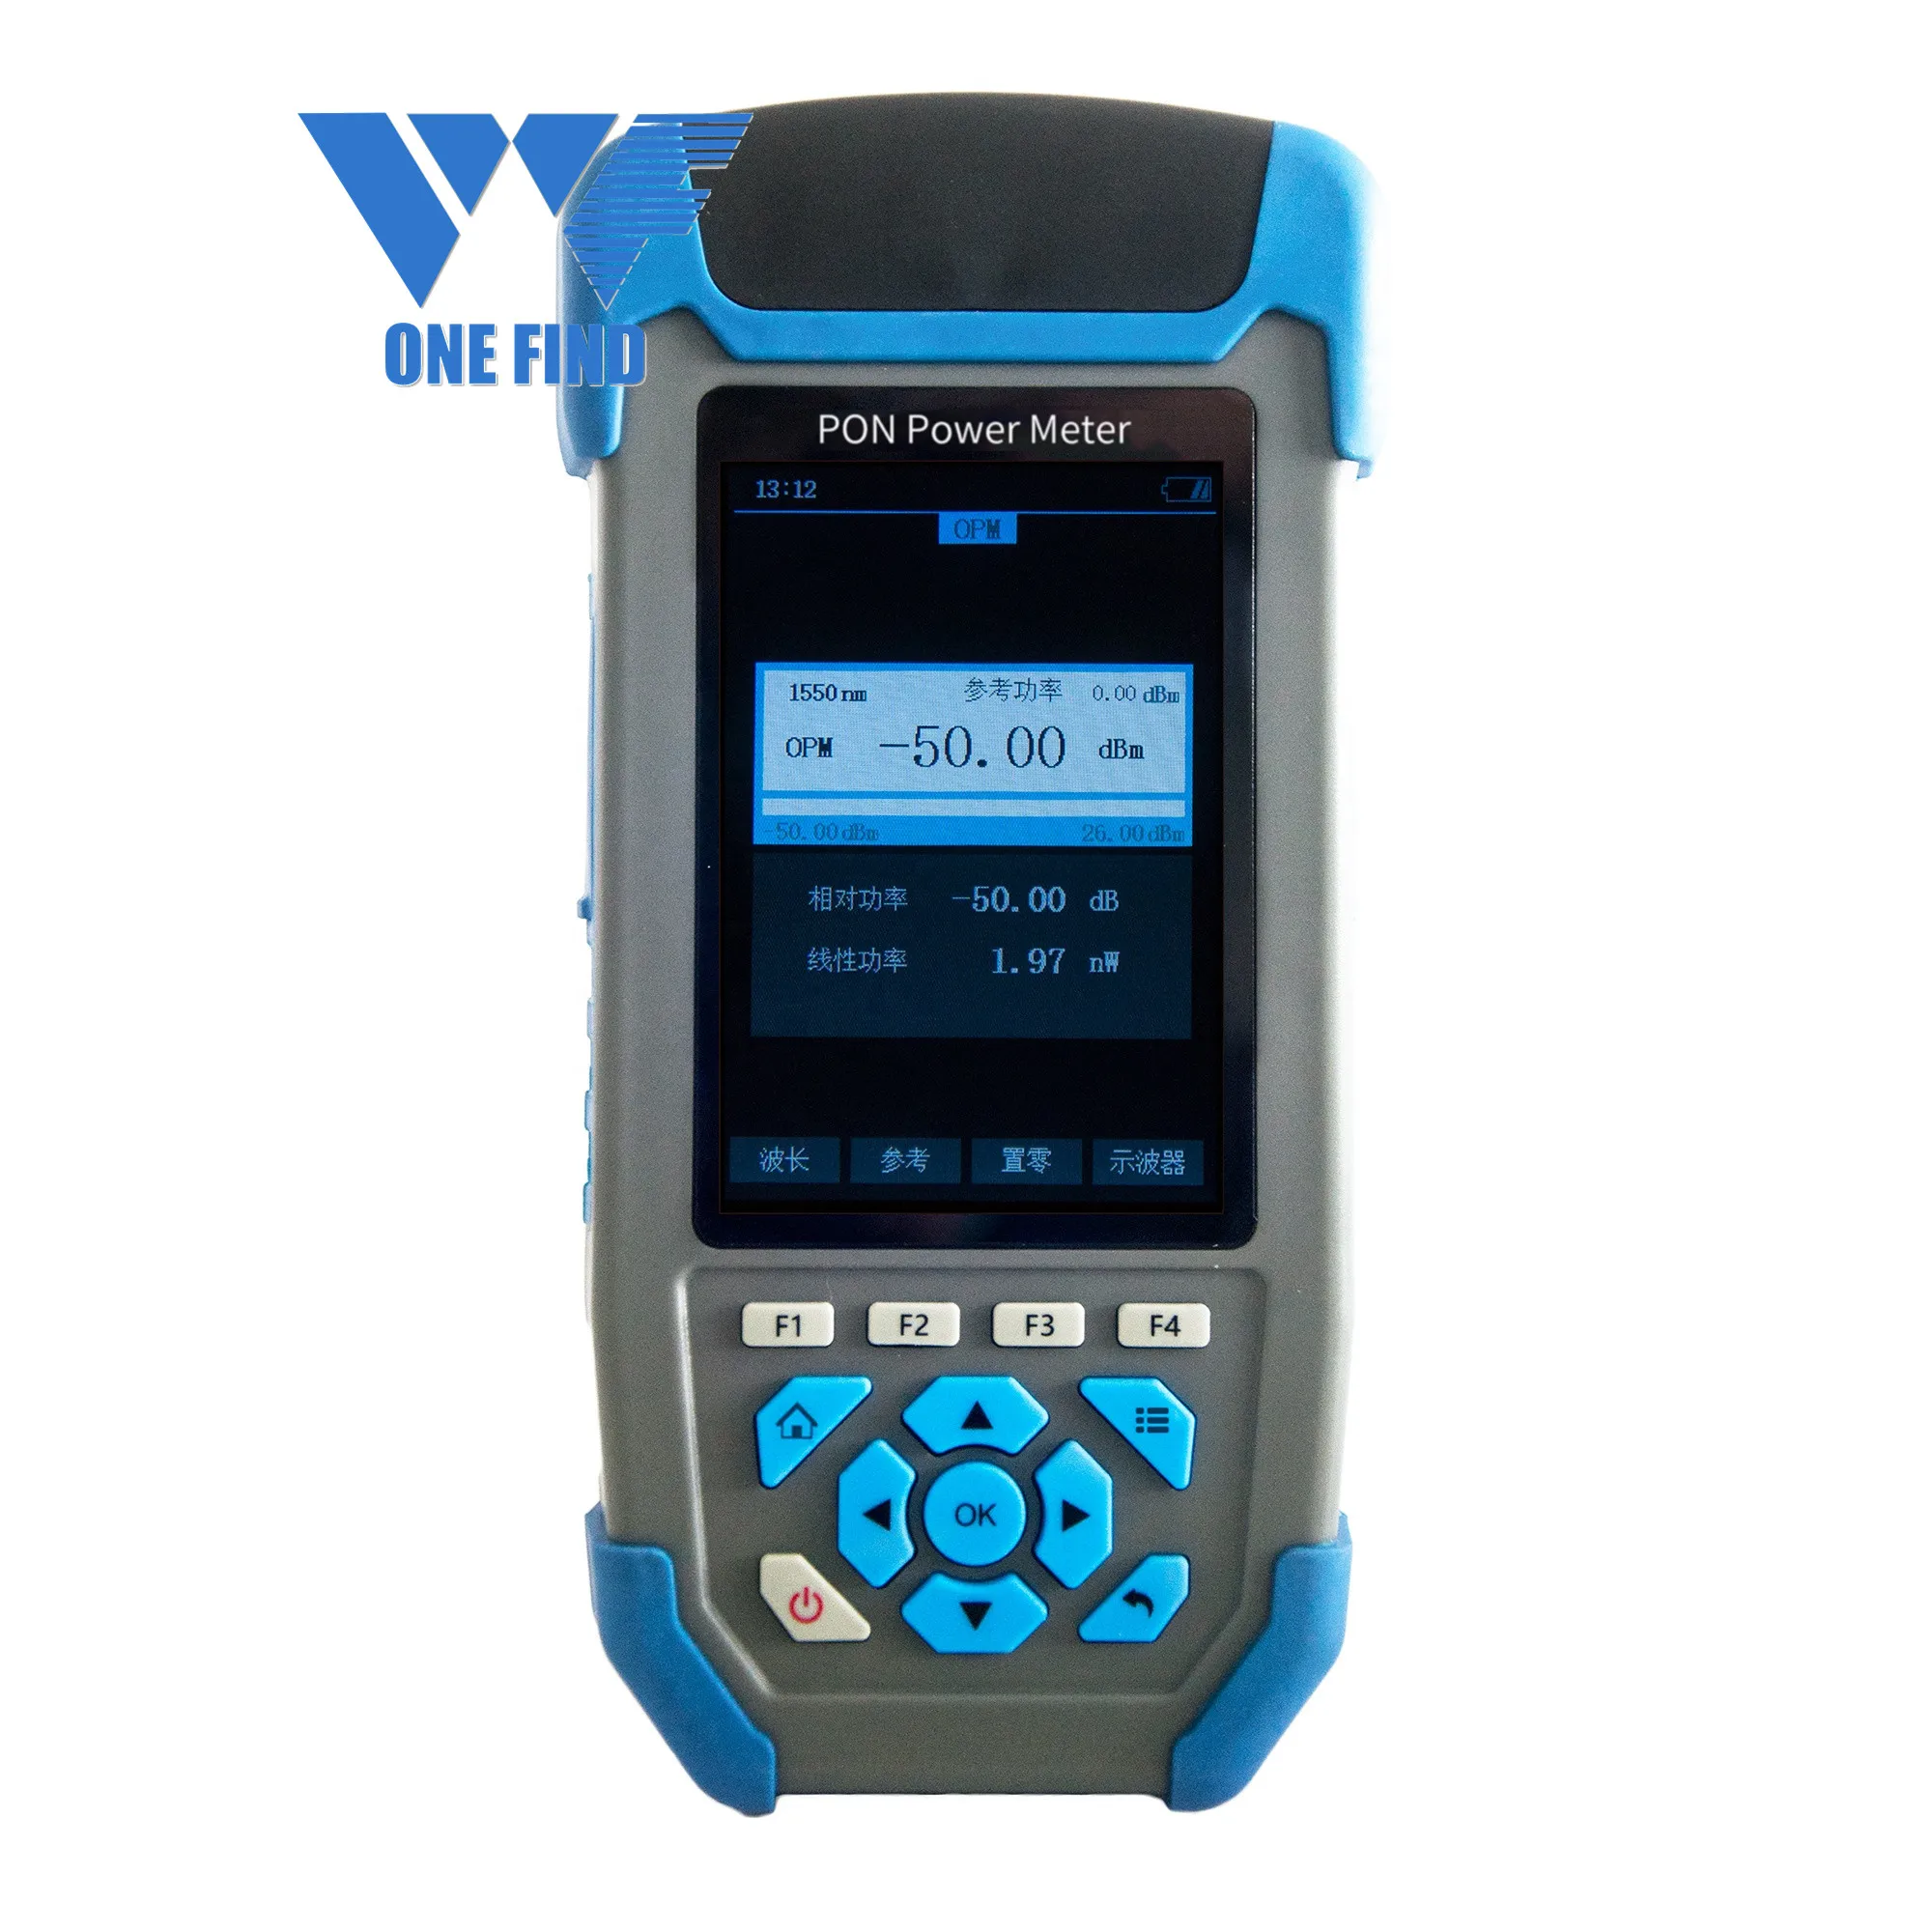 

New arrival Chinese 10G PON Power meter WF3239C Next Generation PON Network Testing like EXFO PPM-350D